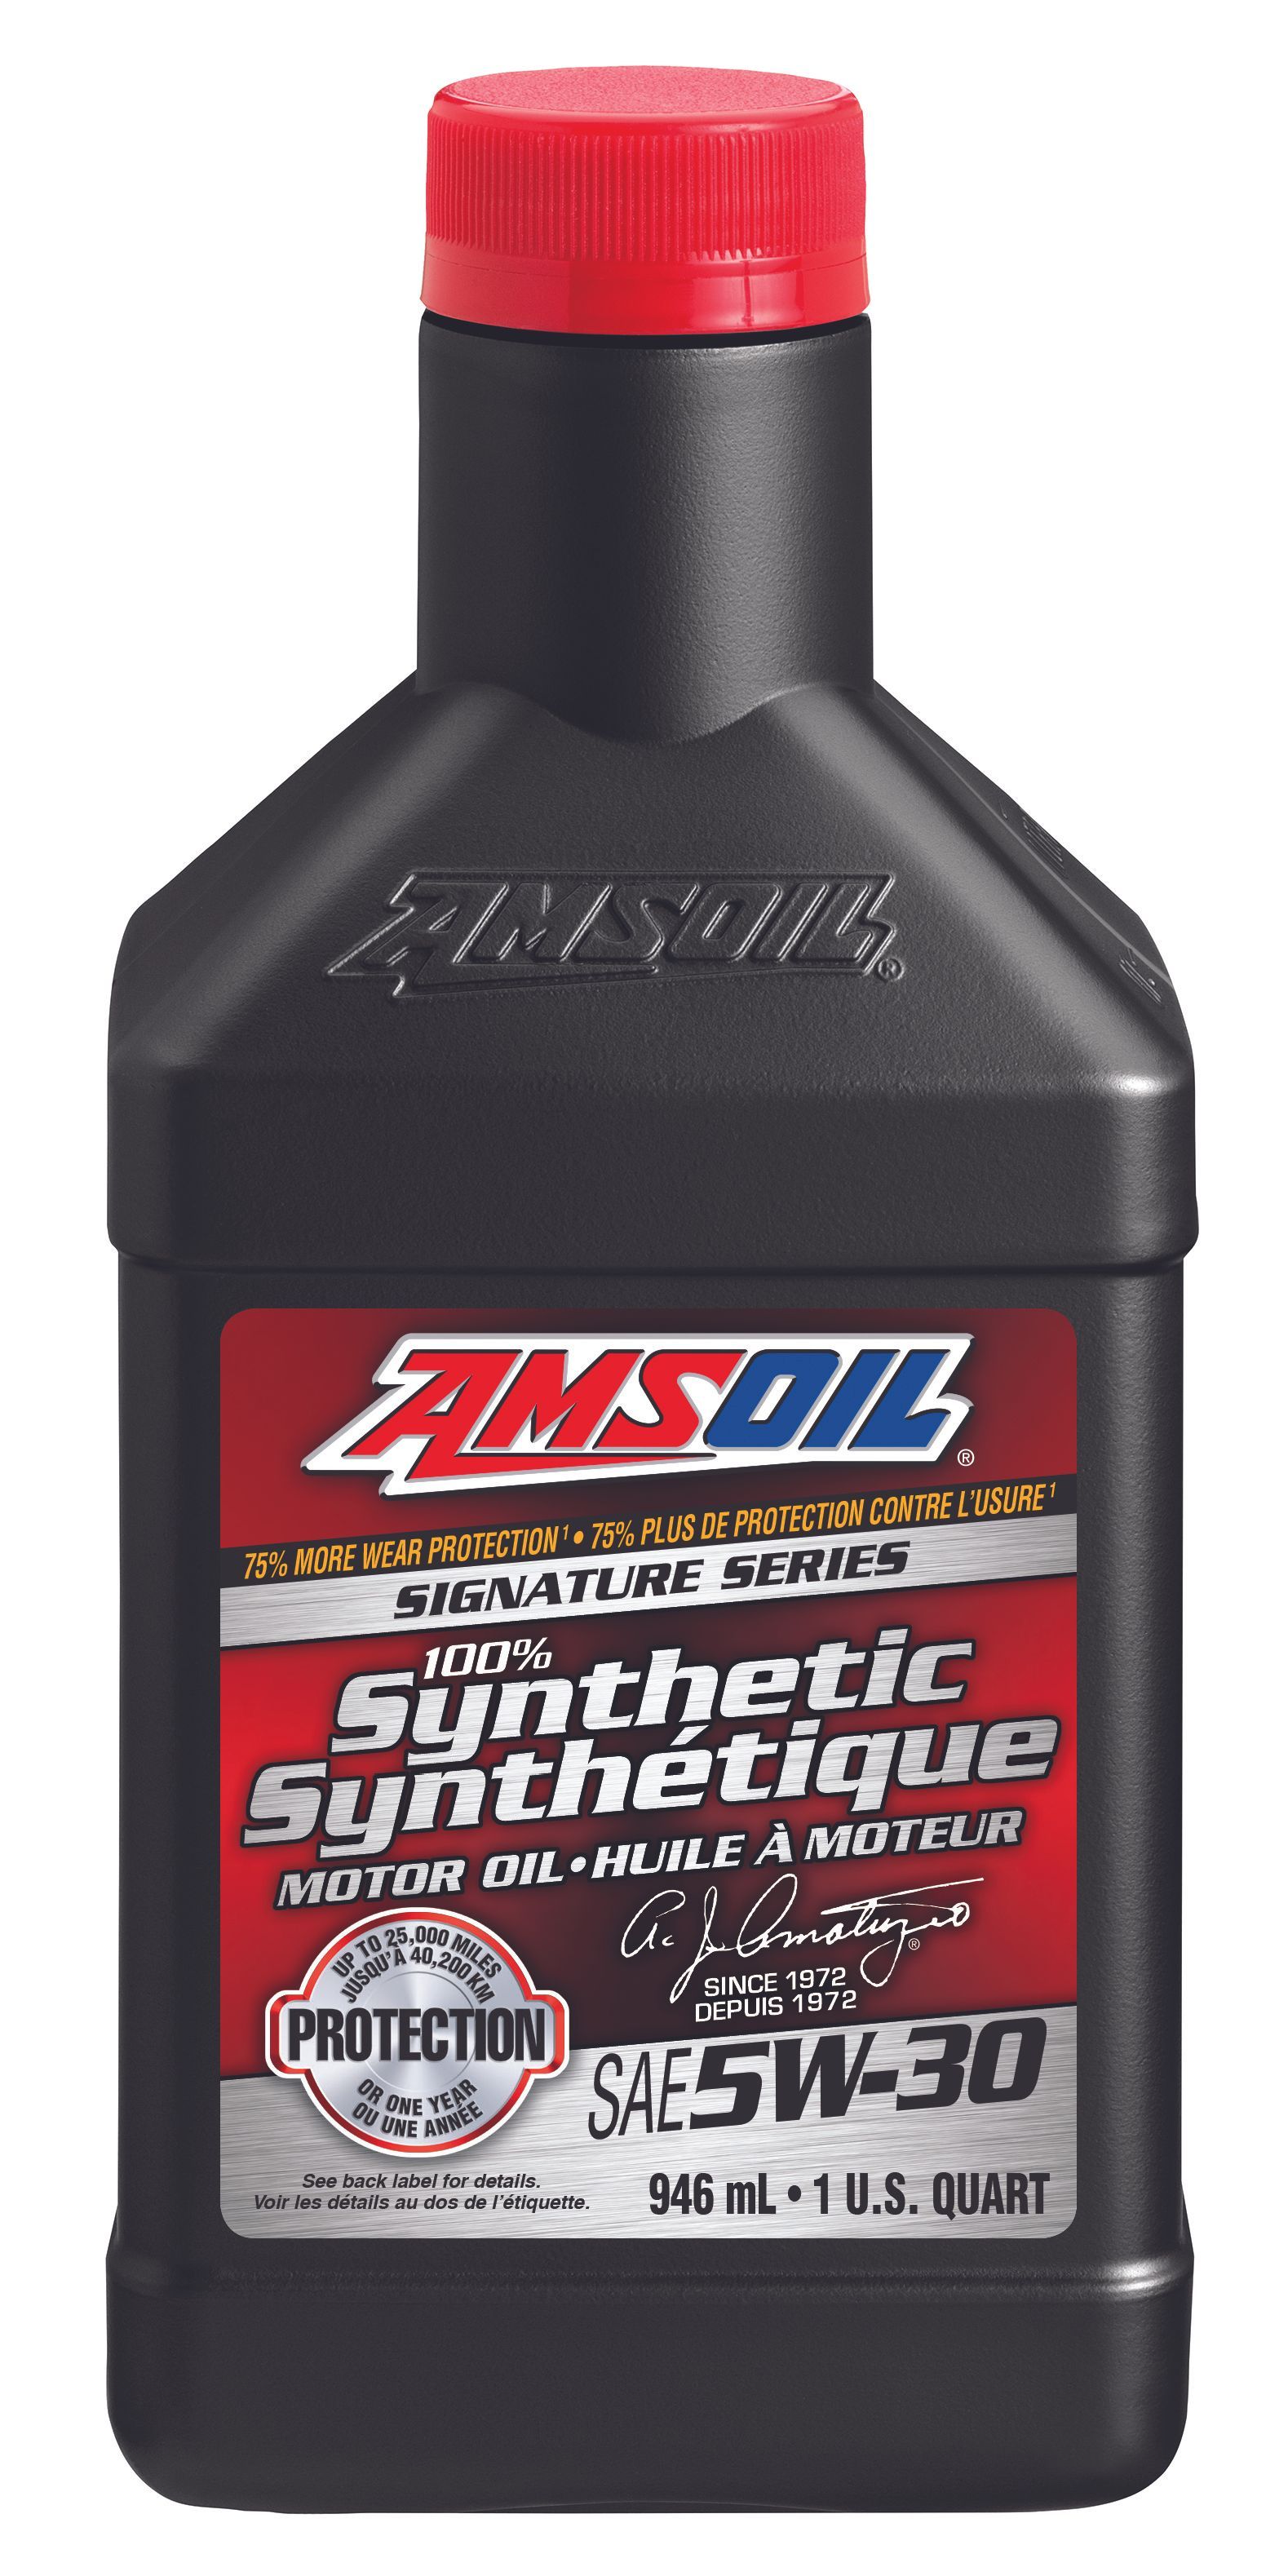 Signature Series Synthetic Oil, SAE 5W-30